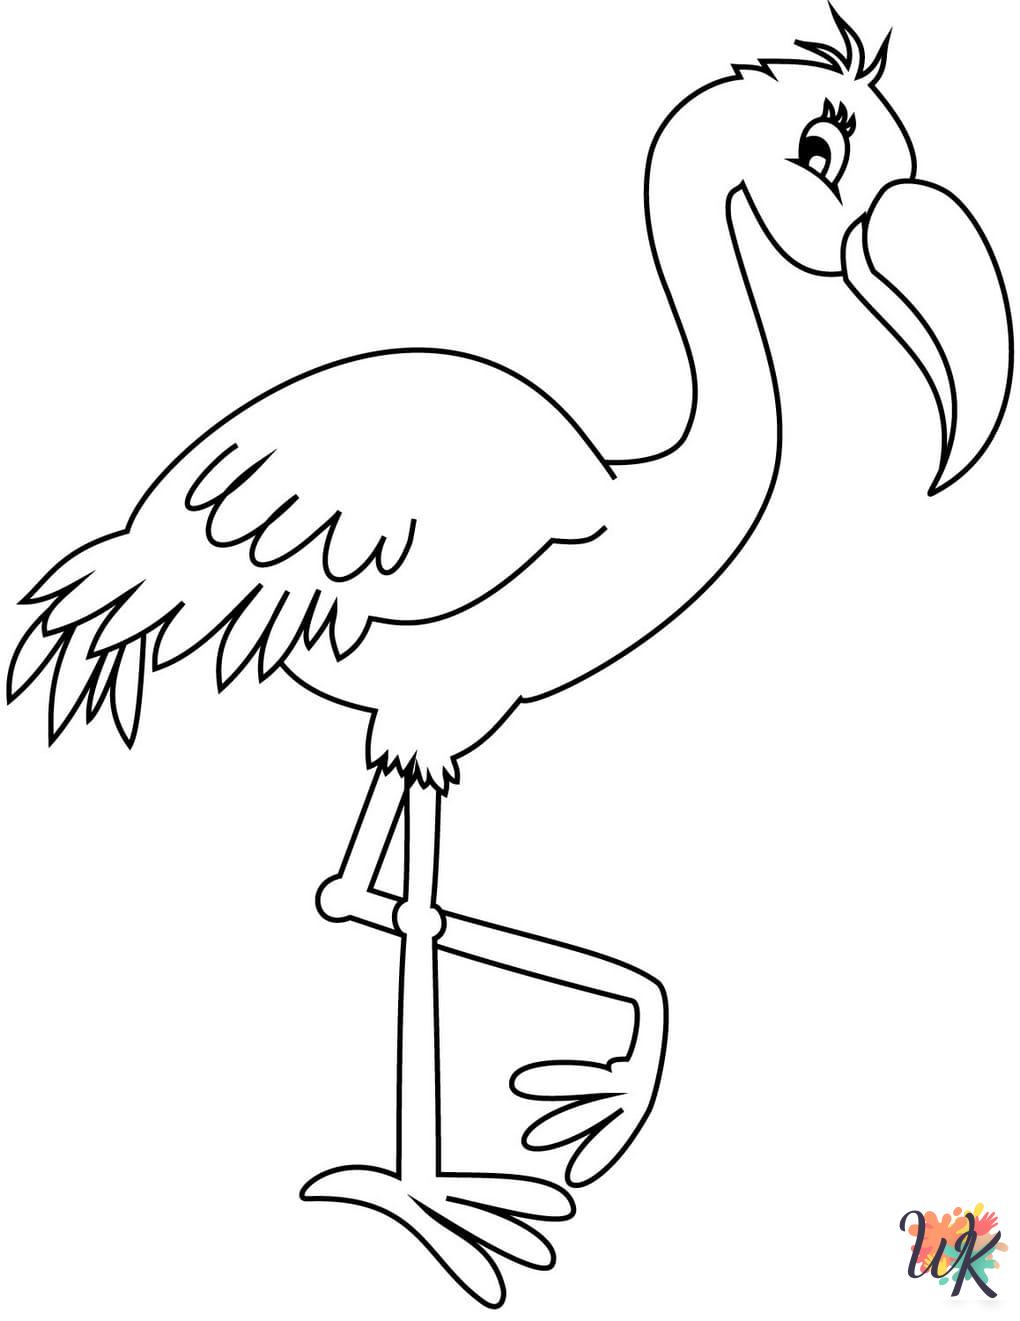 old-fashioned Flamingo coloring pages